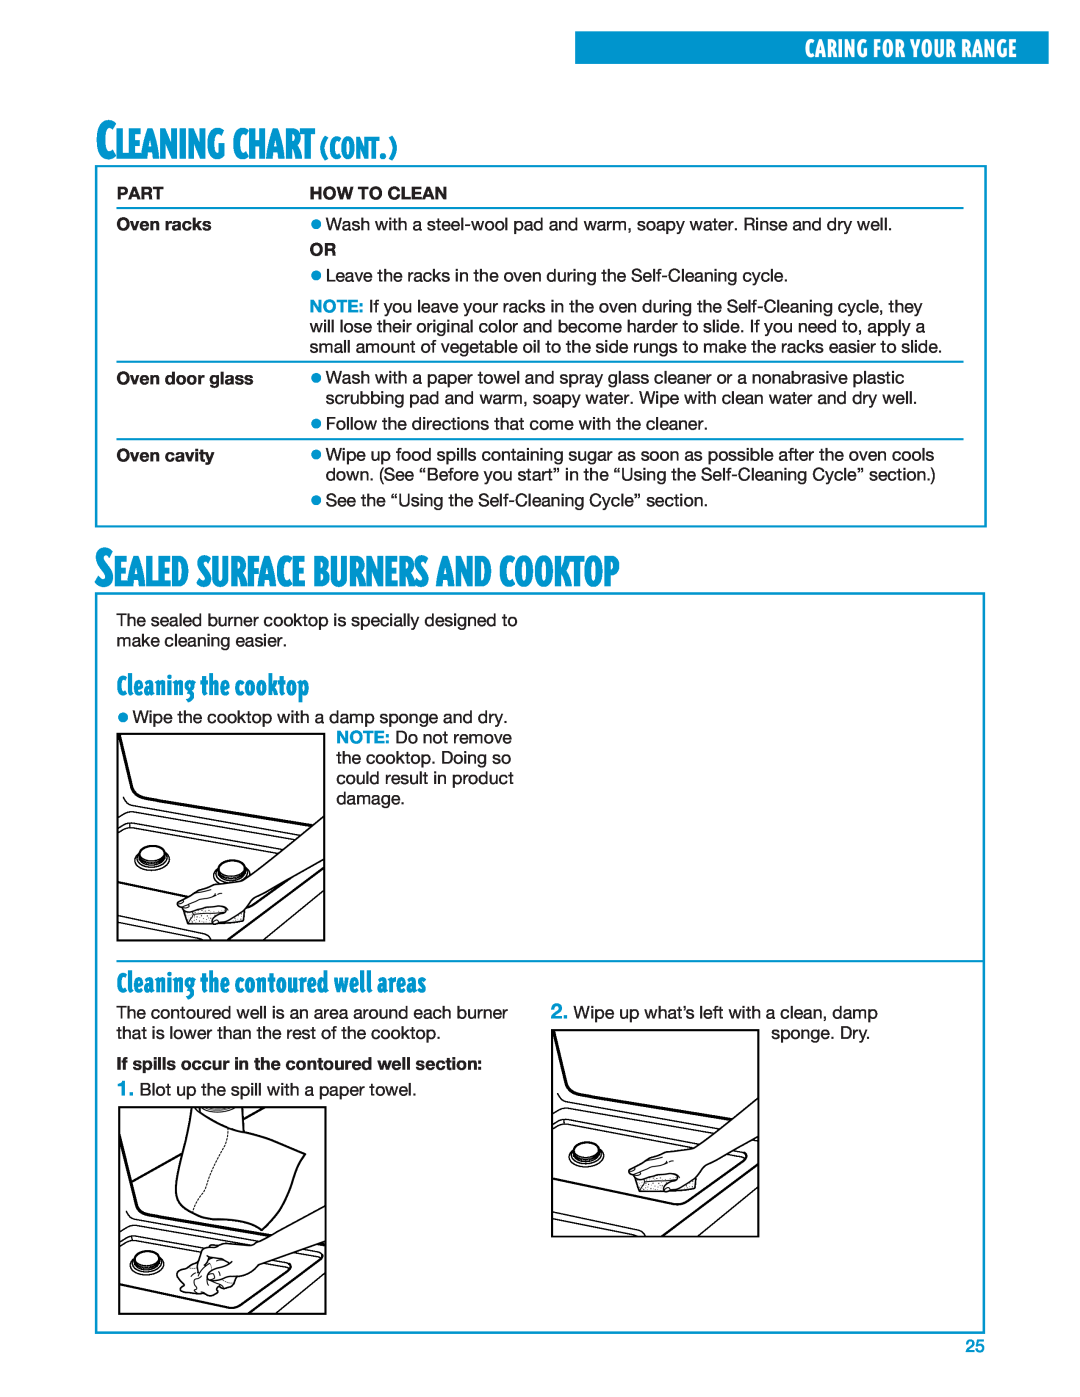 Whirlpool SF360BEE Cleaning Chart Cont, Sealed Surface Burners And Cooktop, Cleaning the cooktop, Caring For Your Range 